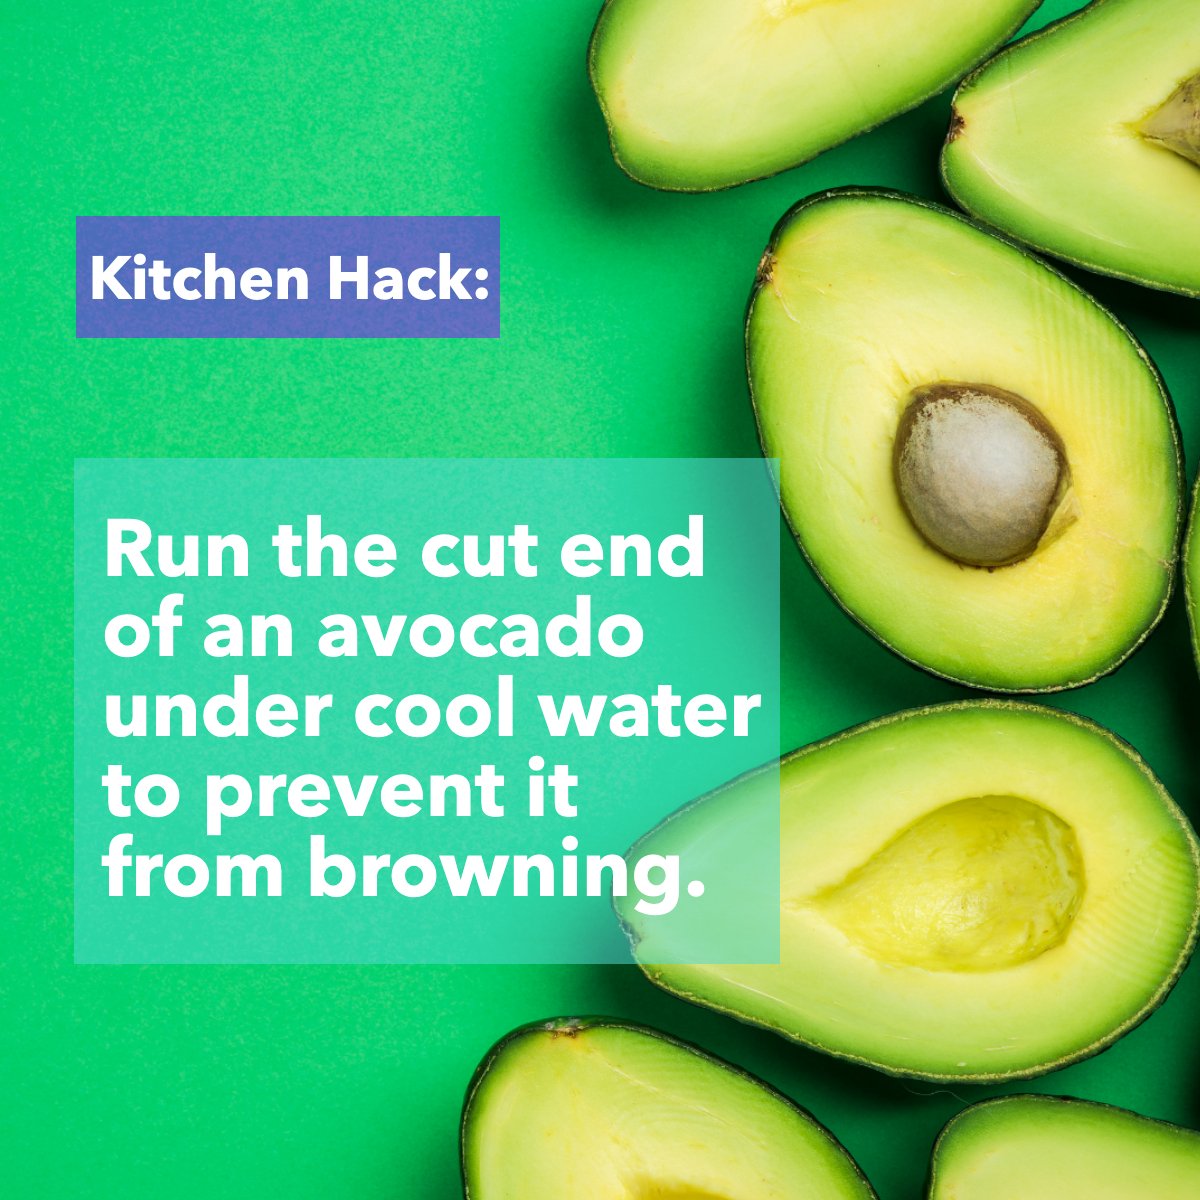 Did you know this? 🤔... now you'll eat your avocados without browning. 

#tip #avocados #kitchen #food
 #swflrealtor #swflrealestate #floridarealestate #florida #newconstruction #homebuying #homebuyingprocess #homebuyingtips #househunting #fsbo #Teamswflelite